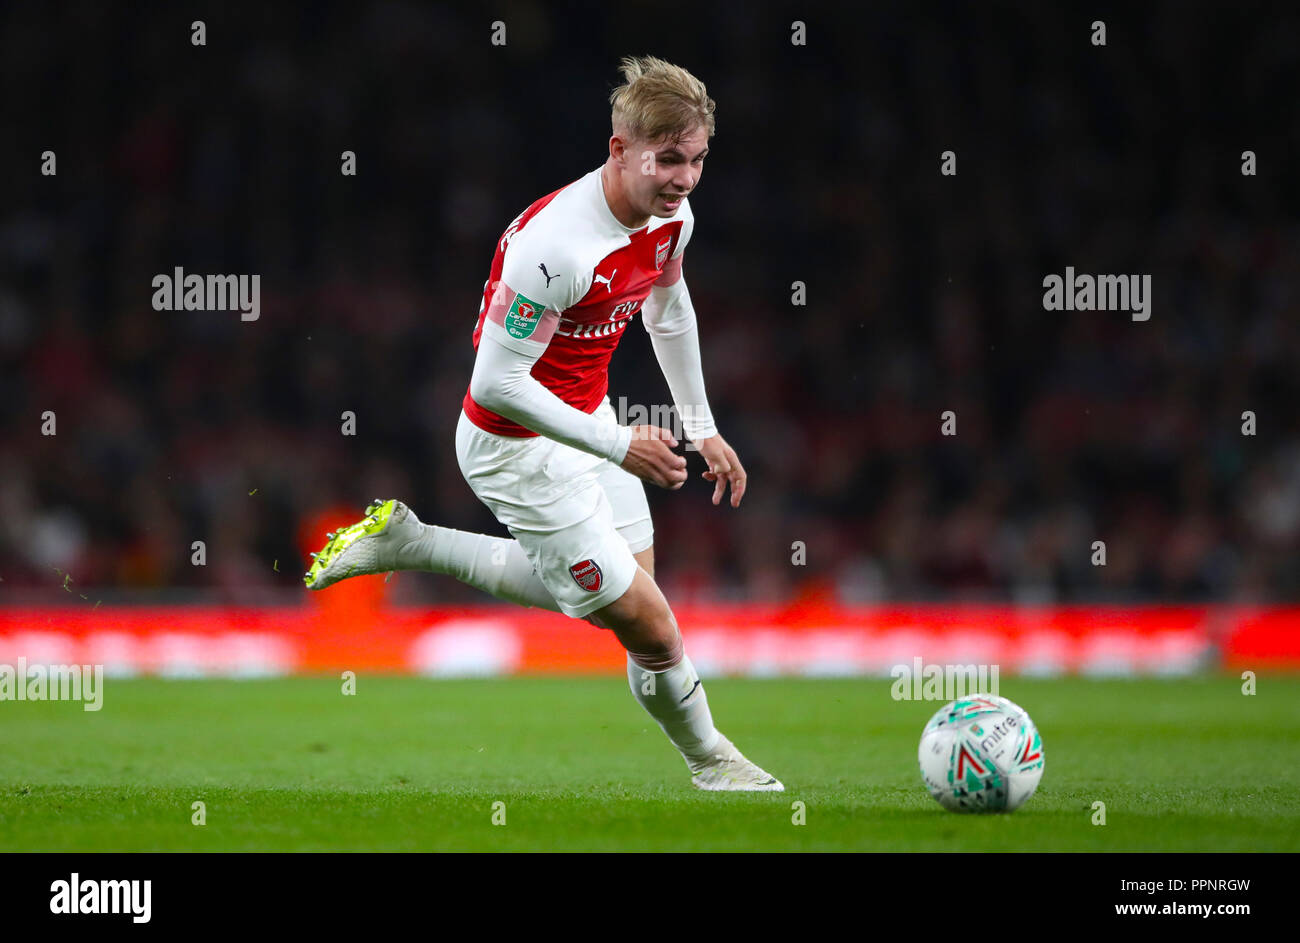 Arsenal's Emile Smith-Rowe during the Carabao Cup, Third Round match at the Emirates Stadium, London. PRESS ASSOCIATION Photo. Picture date: Wednesday September 26, 2018. See PA story SOCCER Arsenal. Photo credit should read: Nick Potts/PA Wire. RESTRICTIONS: No use with unauthorised audio, video, data, fixture lists, club/league logos or 'live' services. Online in-match use limited to 120 images, no video emulation. No use in betting, games or single club/league/player publications. Stock Photo